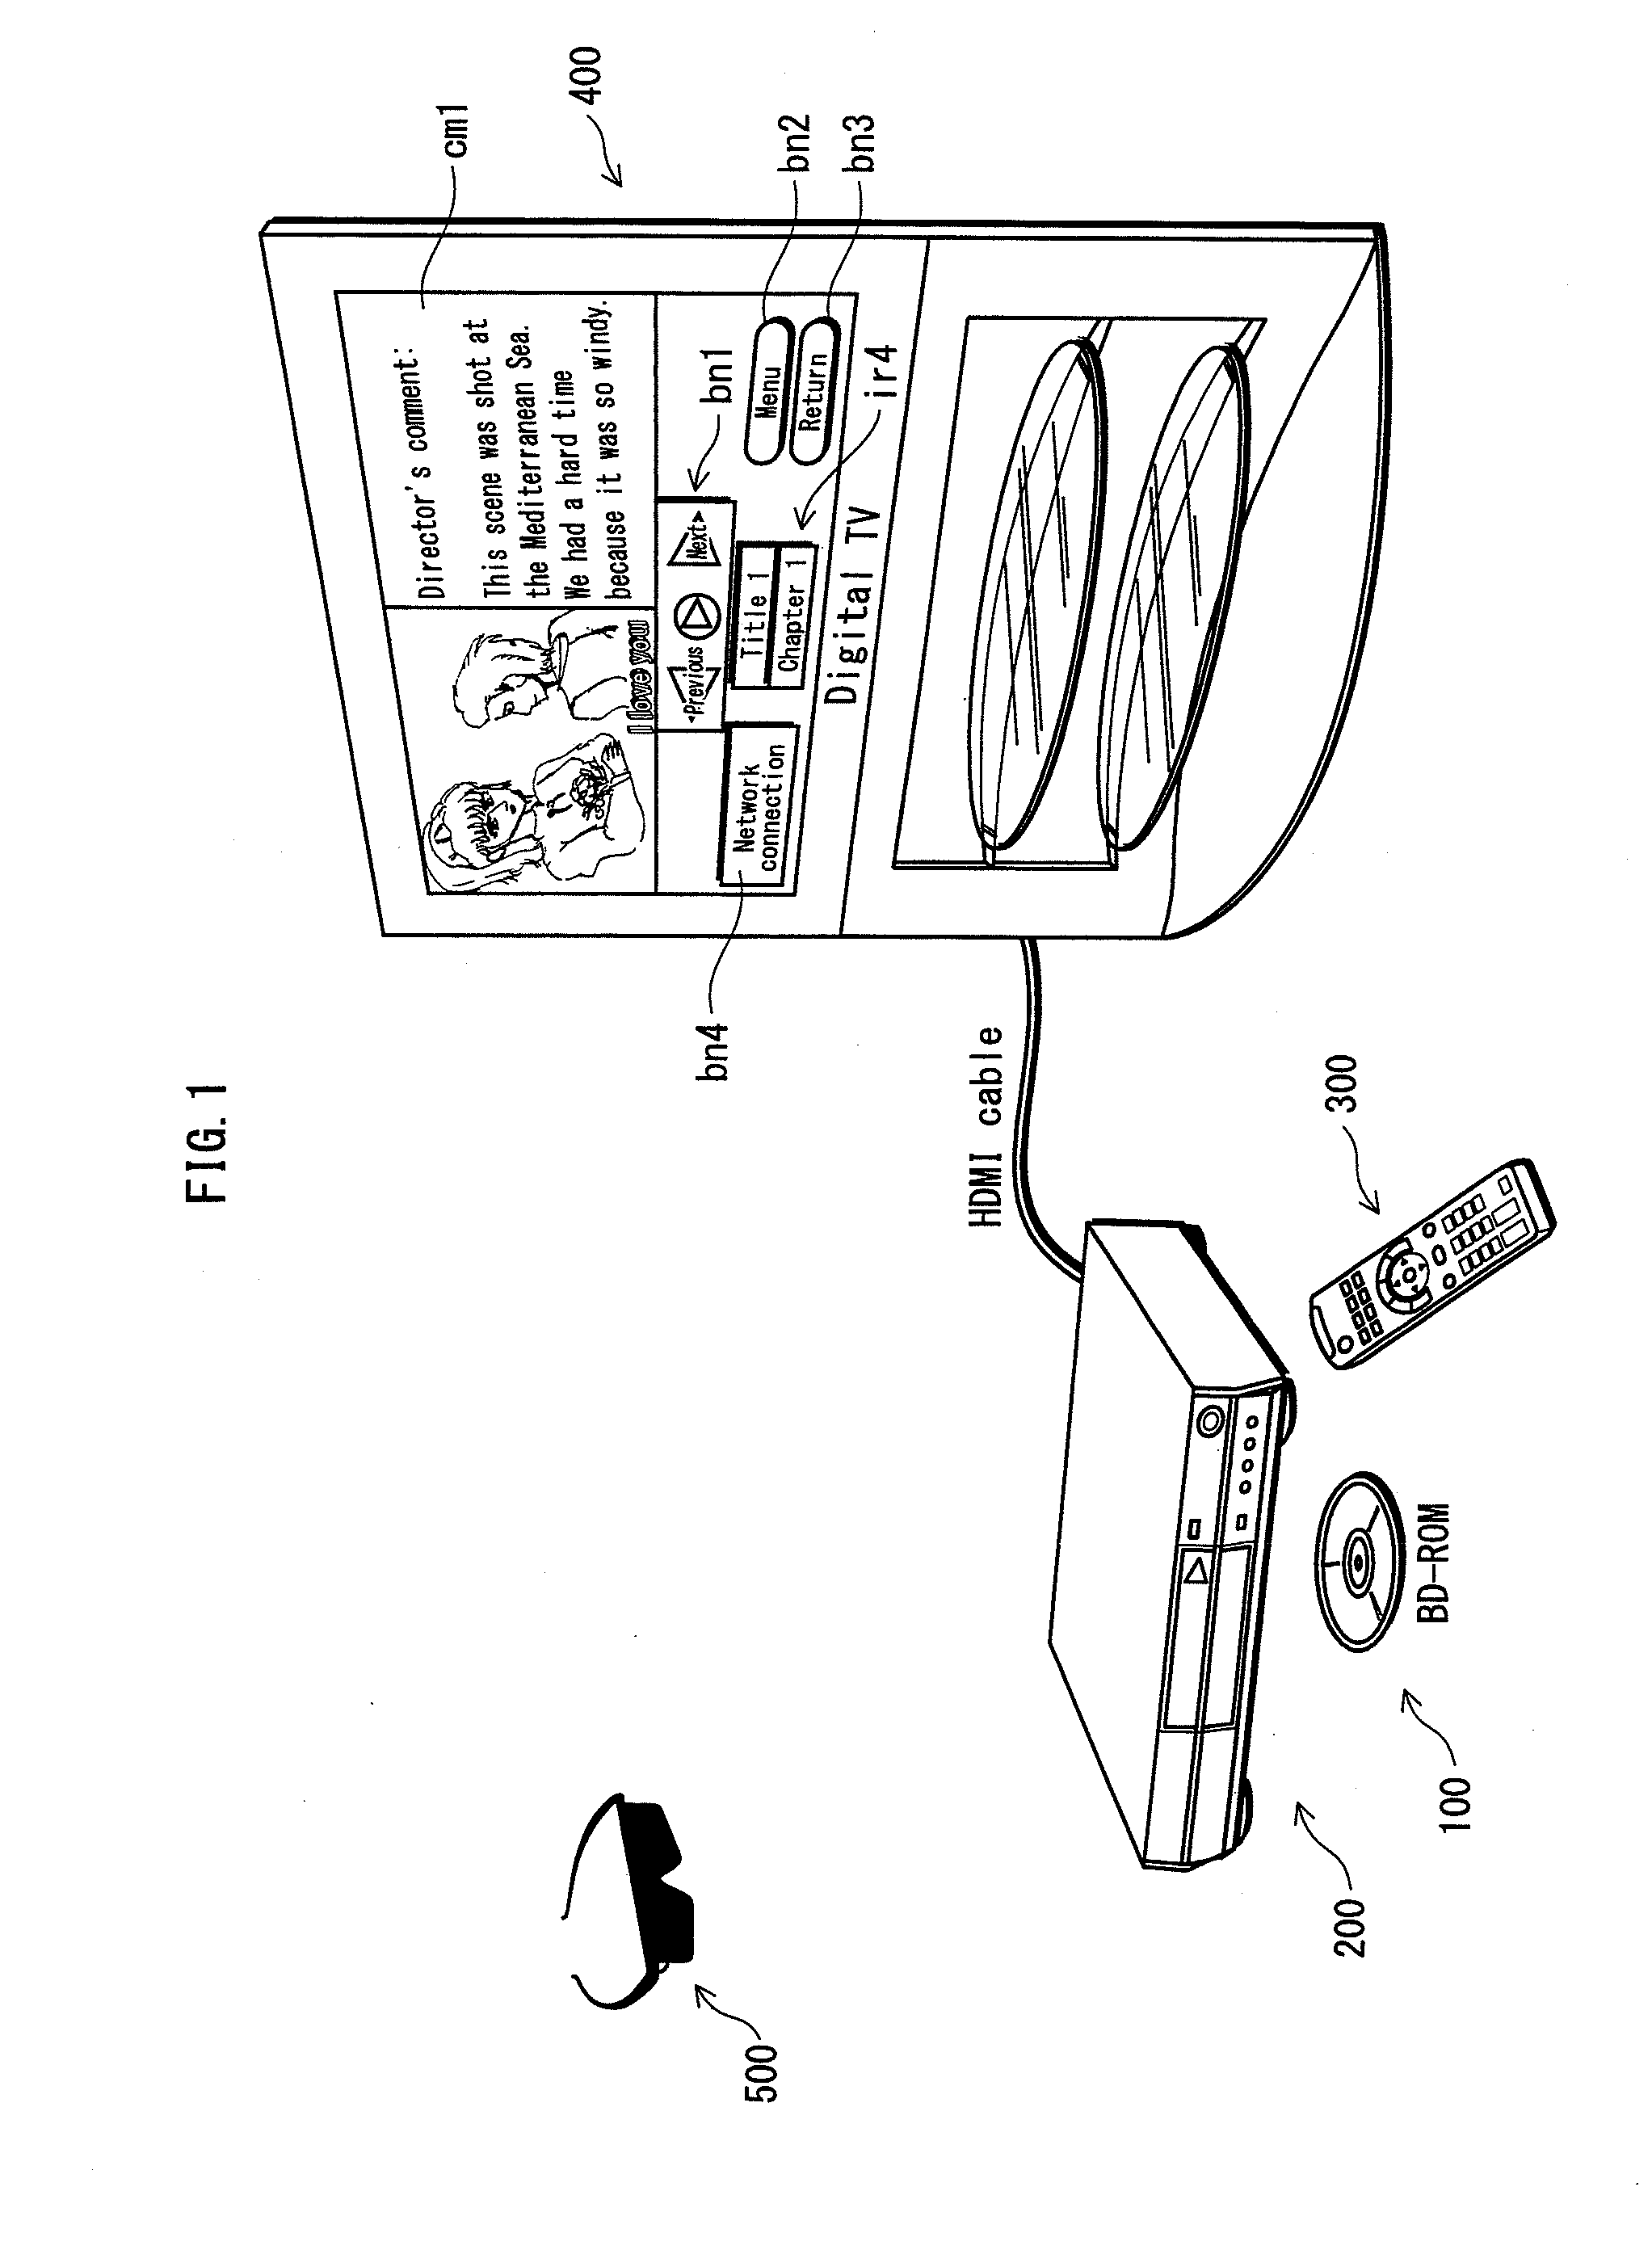 Playback apparatus, playback method, and program for performing stereoscopic playback